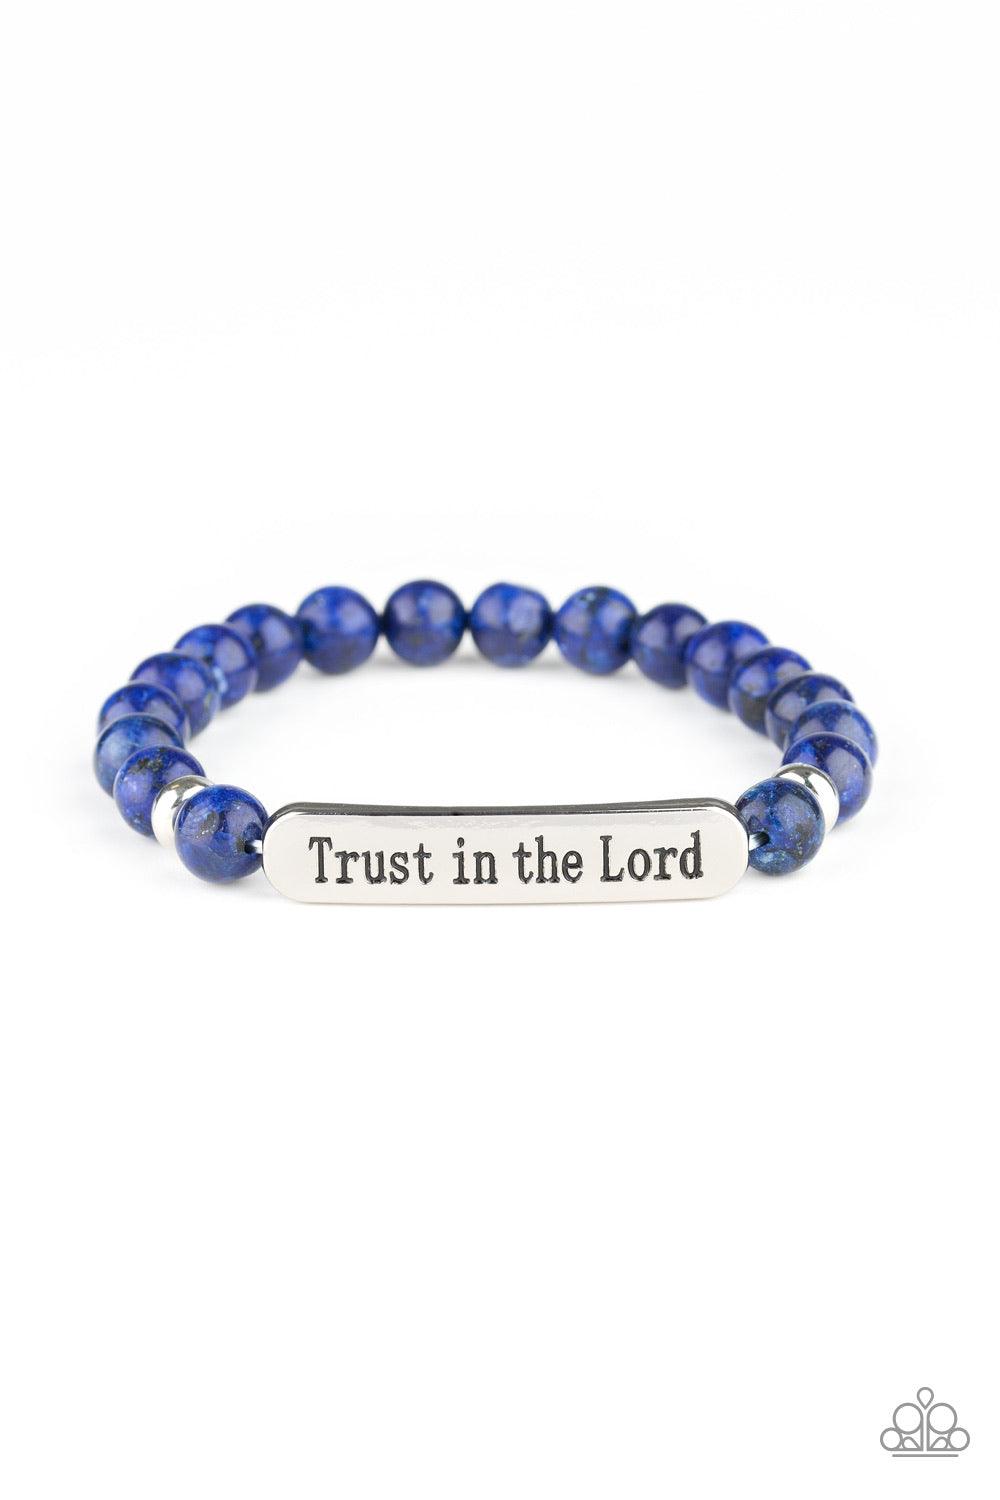 Paparazzi Accessories Trust Always - Blue Infused with dainty silver accents, a collection of glassy blue stone beads and a shimmery silver frame stamped in the phrase, "Trust in the Lord", are threaded along a stretchy band around the wrist for an inspir